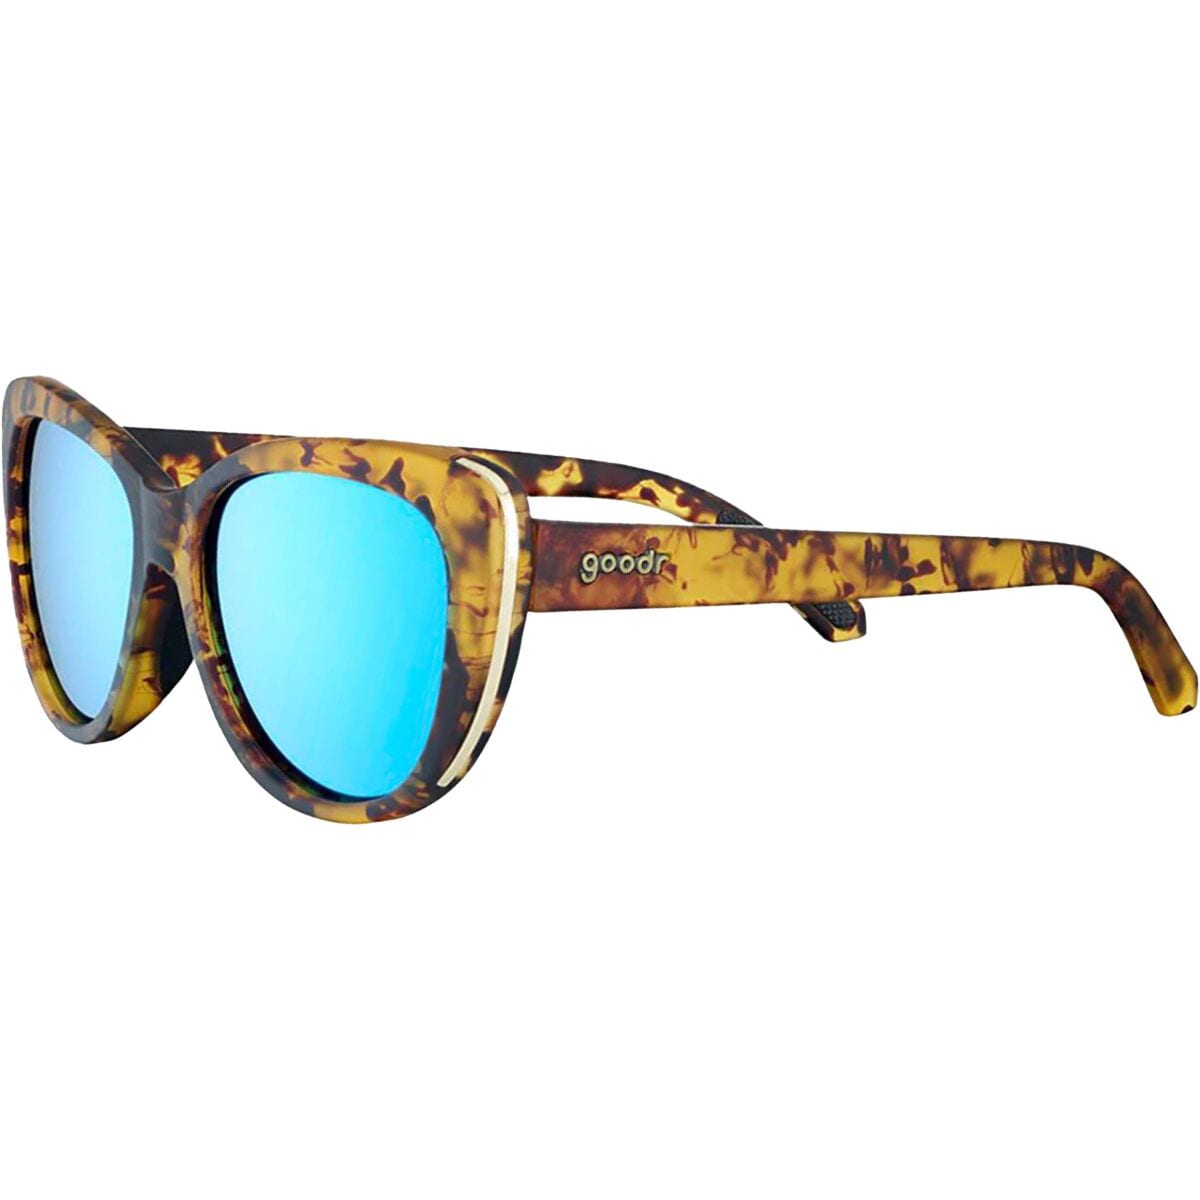 Goodr Runway/Sunny Couture Polarized Sunglasses